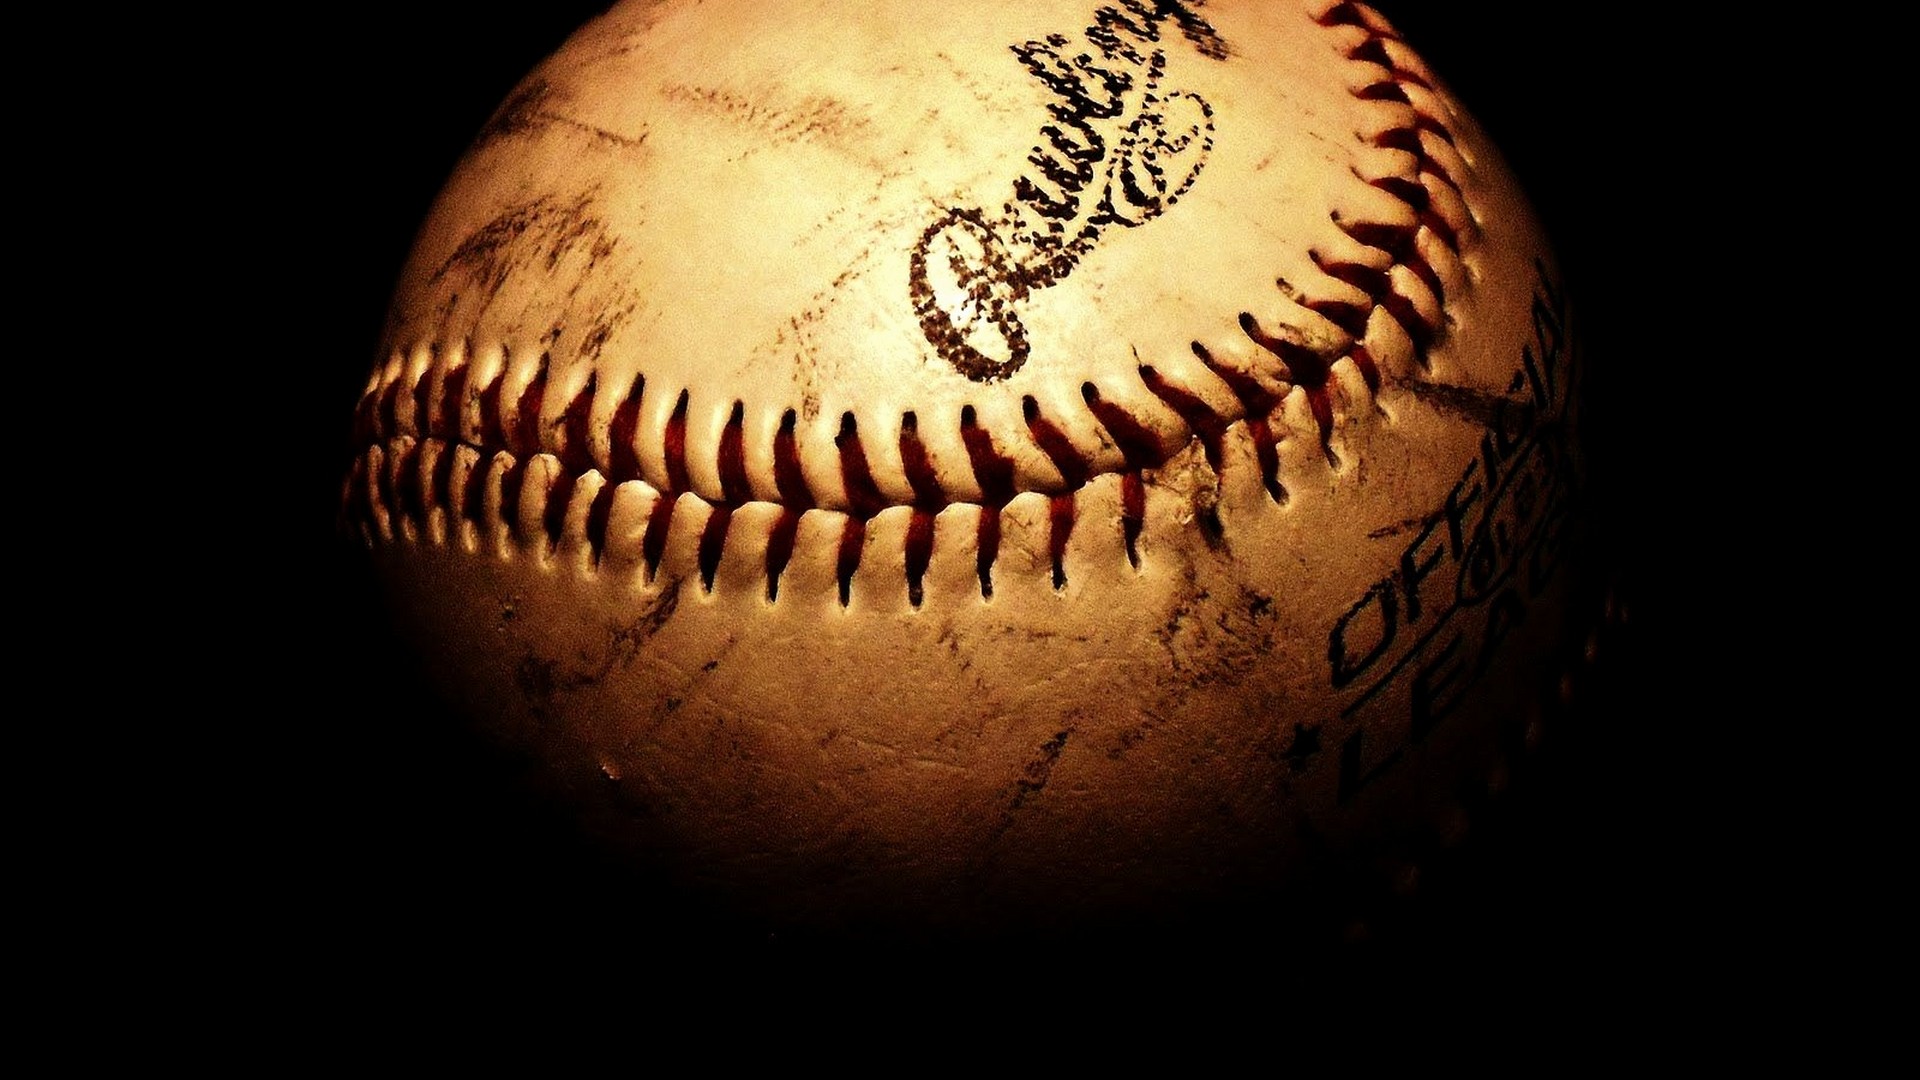 Cool Baseball Wallpaper HD With high-resolution 1920X1080 pixel. You can use this wallpaper for Mac Desktop Wallpaper, Laptop Screensavers, Android Wallpapers, Tablet or iPhone Home Screen and another mobile phone device